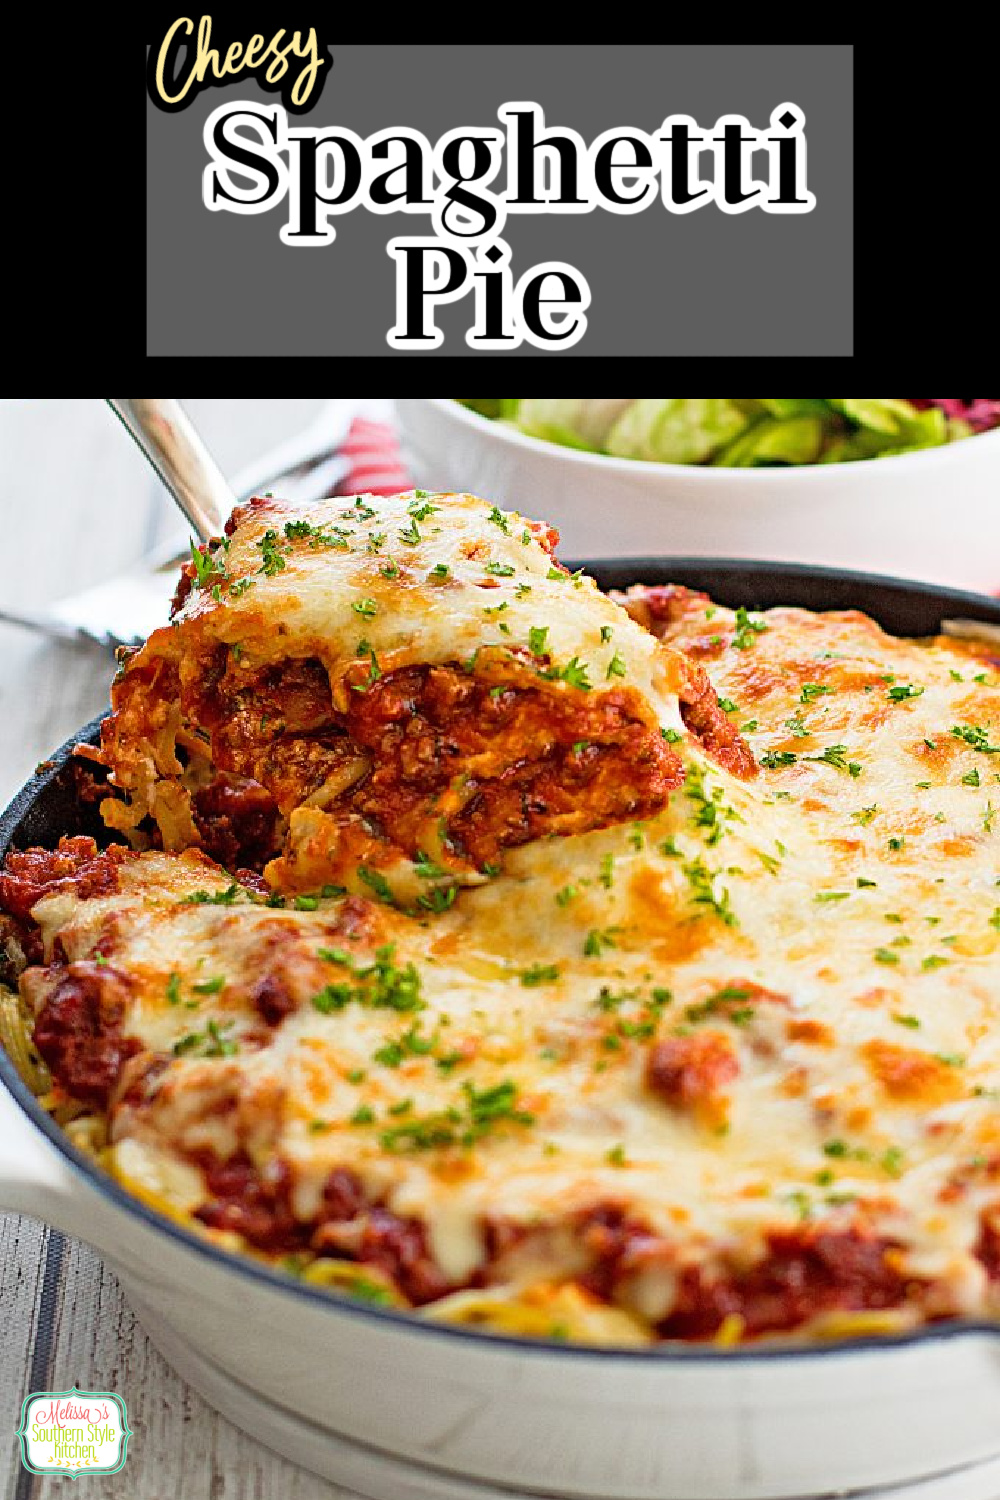 Make this spaghetti pie for a weekday Italian feast #spaghetti #spaghettirecipes #spaghettisauce #pasta #dinner #dinnerideas #southernrecipes #easygroundbeefrecipes #southernfood